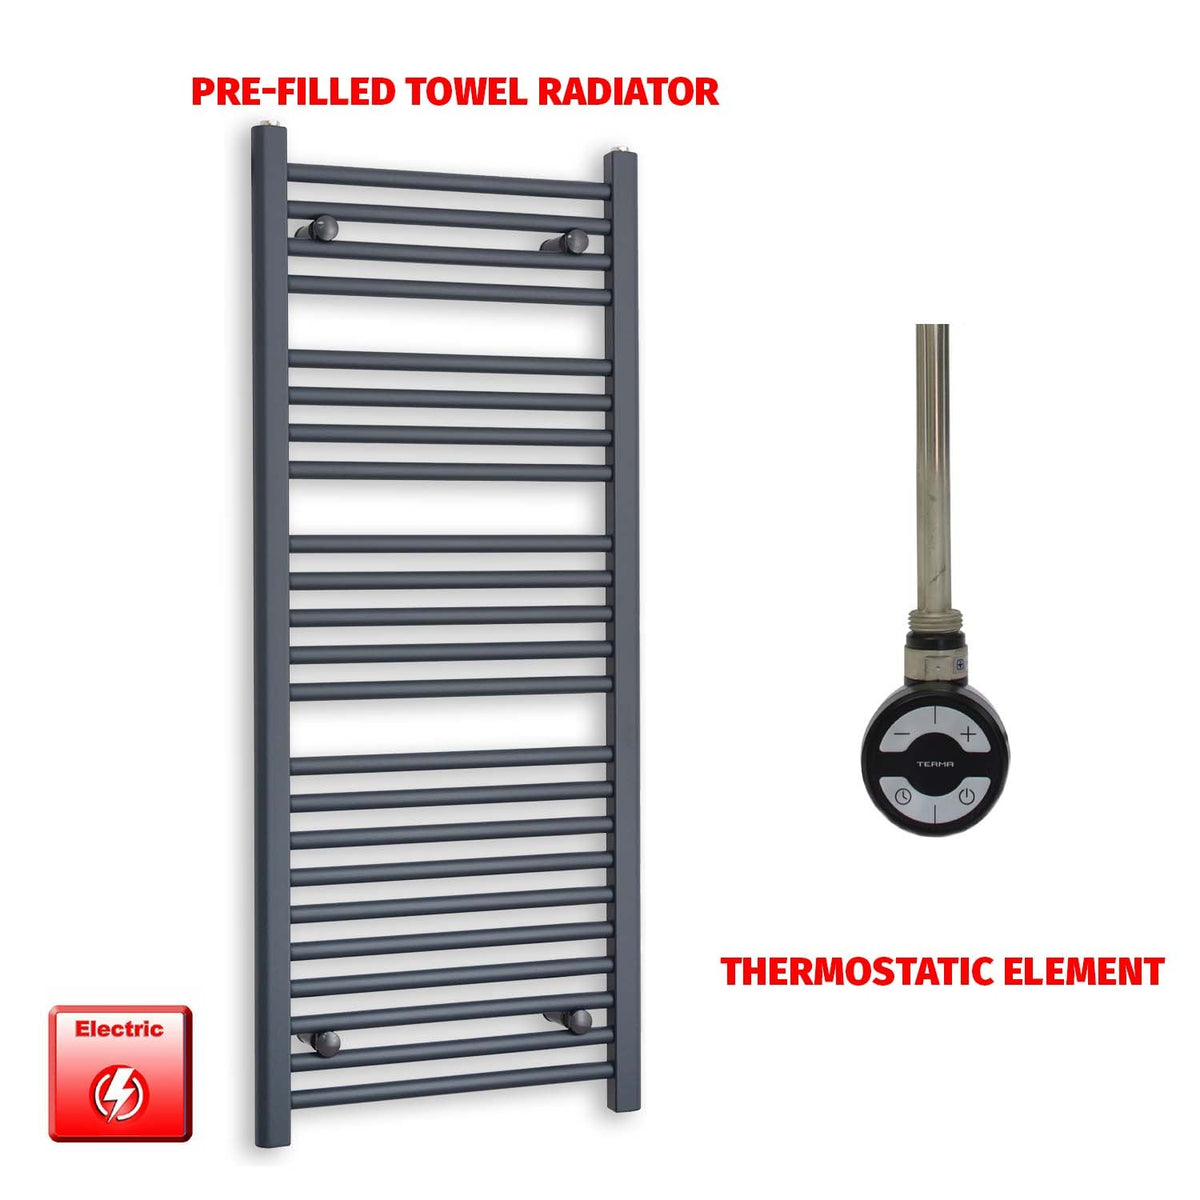 1200mm High 500mm Wide Flat Anthracite Pre-Filled Electric Heated Towel Rail Radiator HTR MOA Thermostatic element no timer